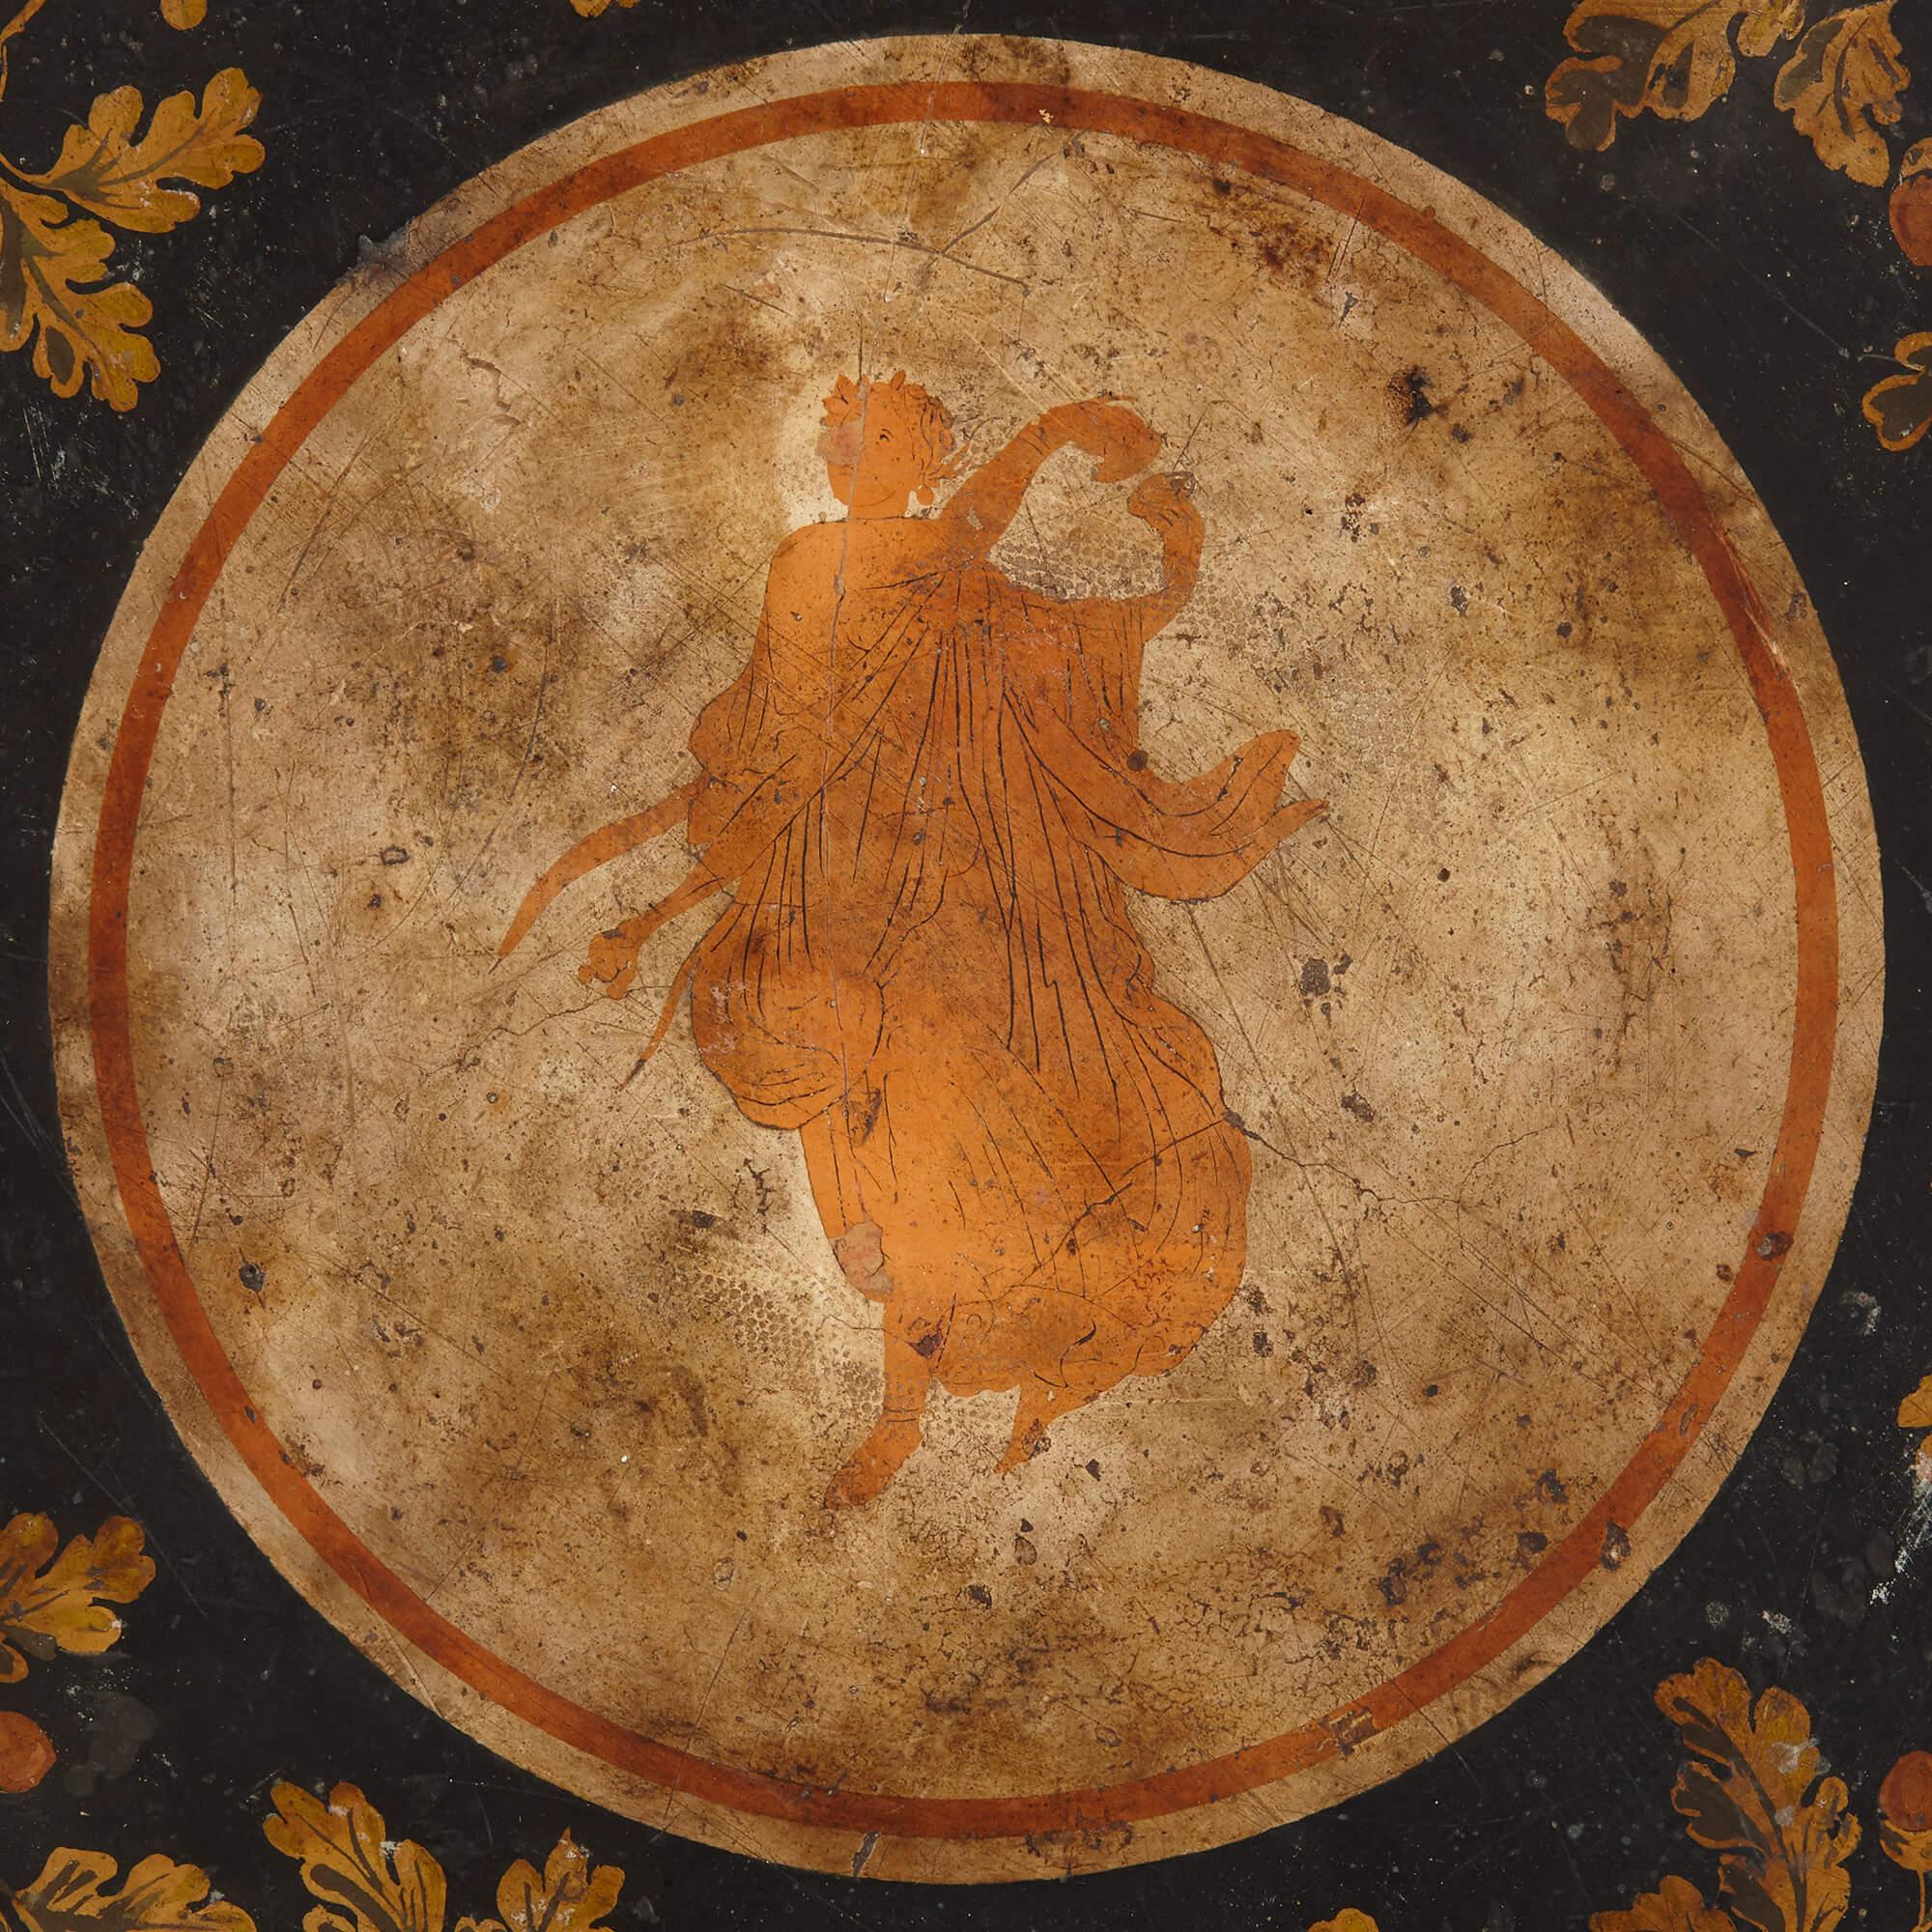 Neoclassical 19th century Italian scagliola table surface 
Italy, 19th century
Diameter: 50.5cm, depth 1cm

Comprising a decorative outer band with leaves and acorns in a wreath around a central space with a singular figure, this excellent